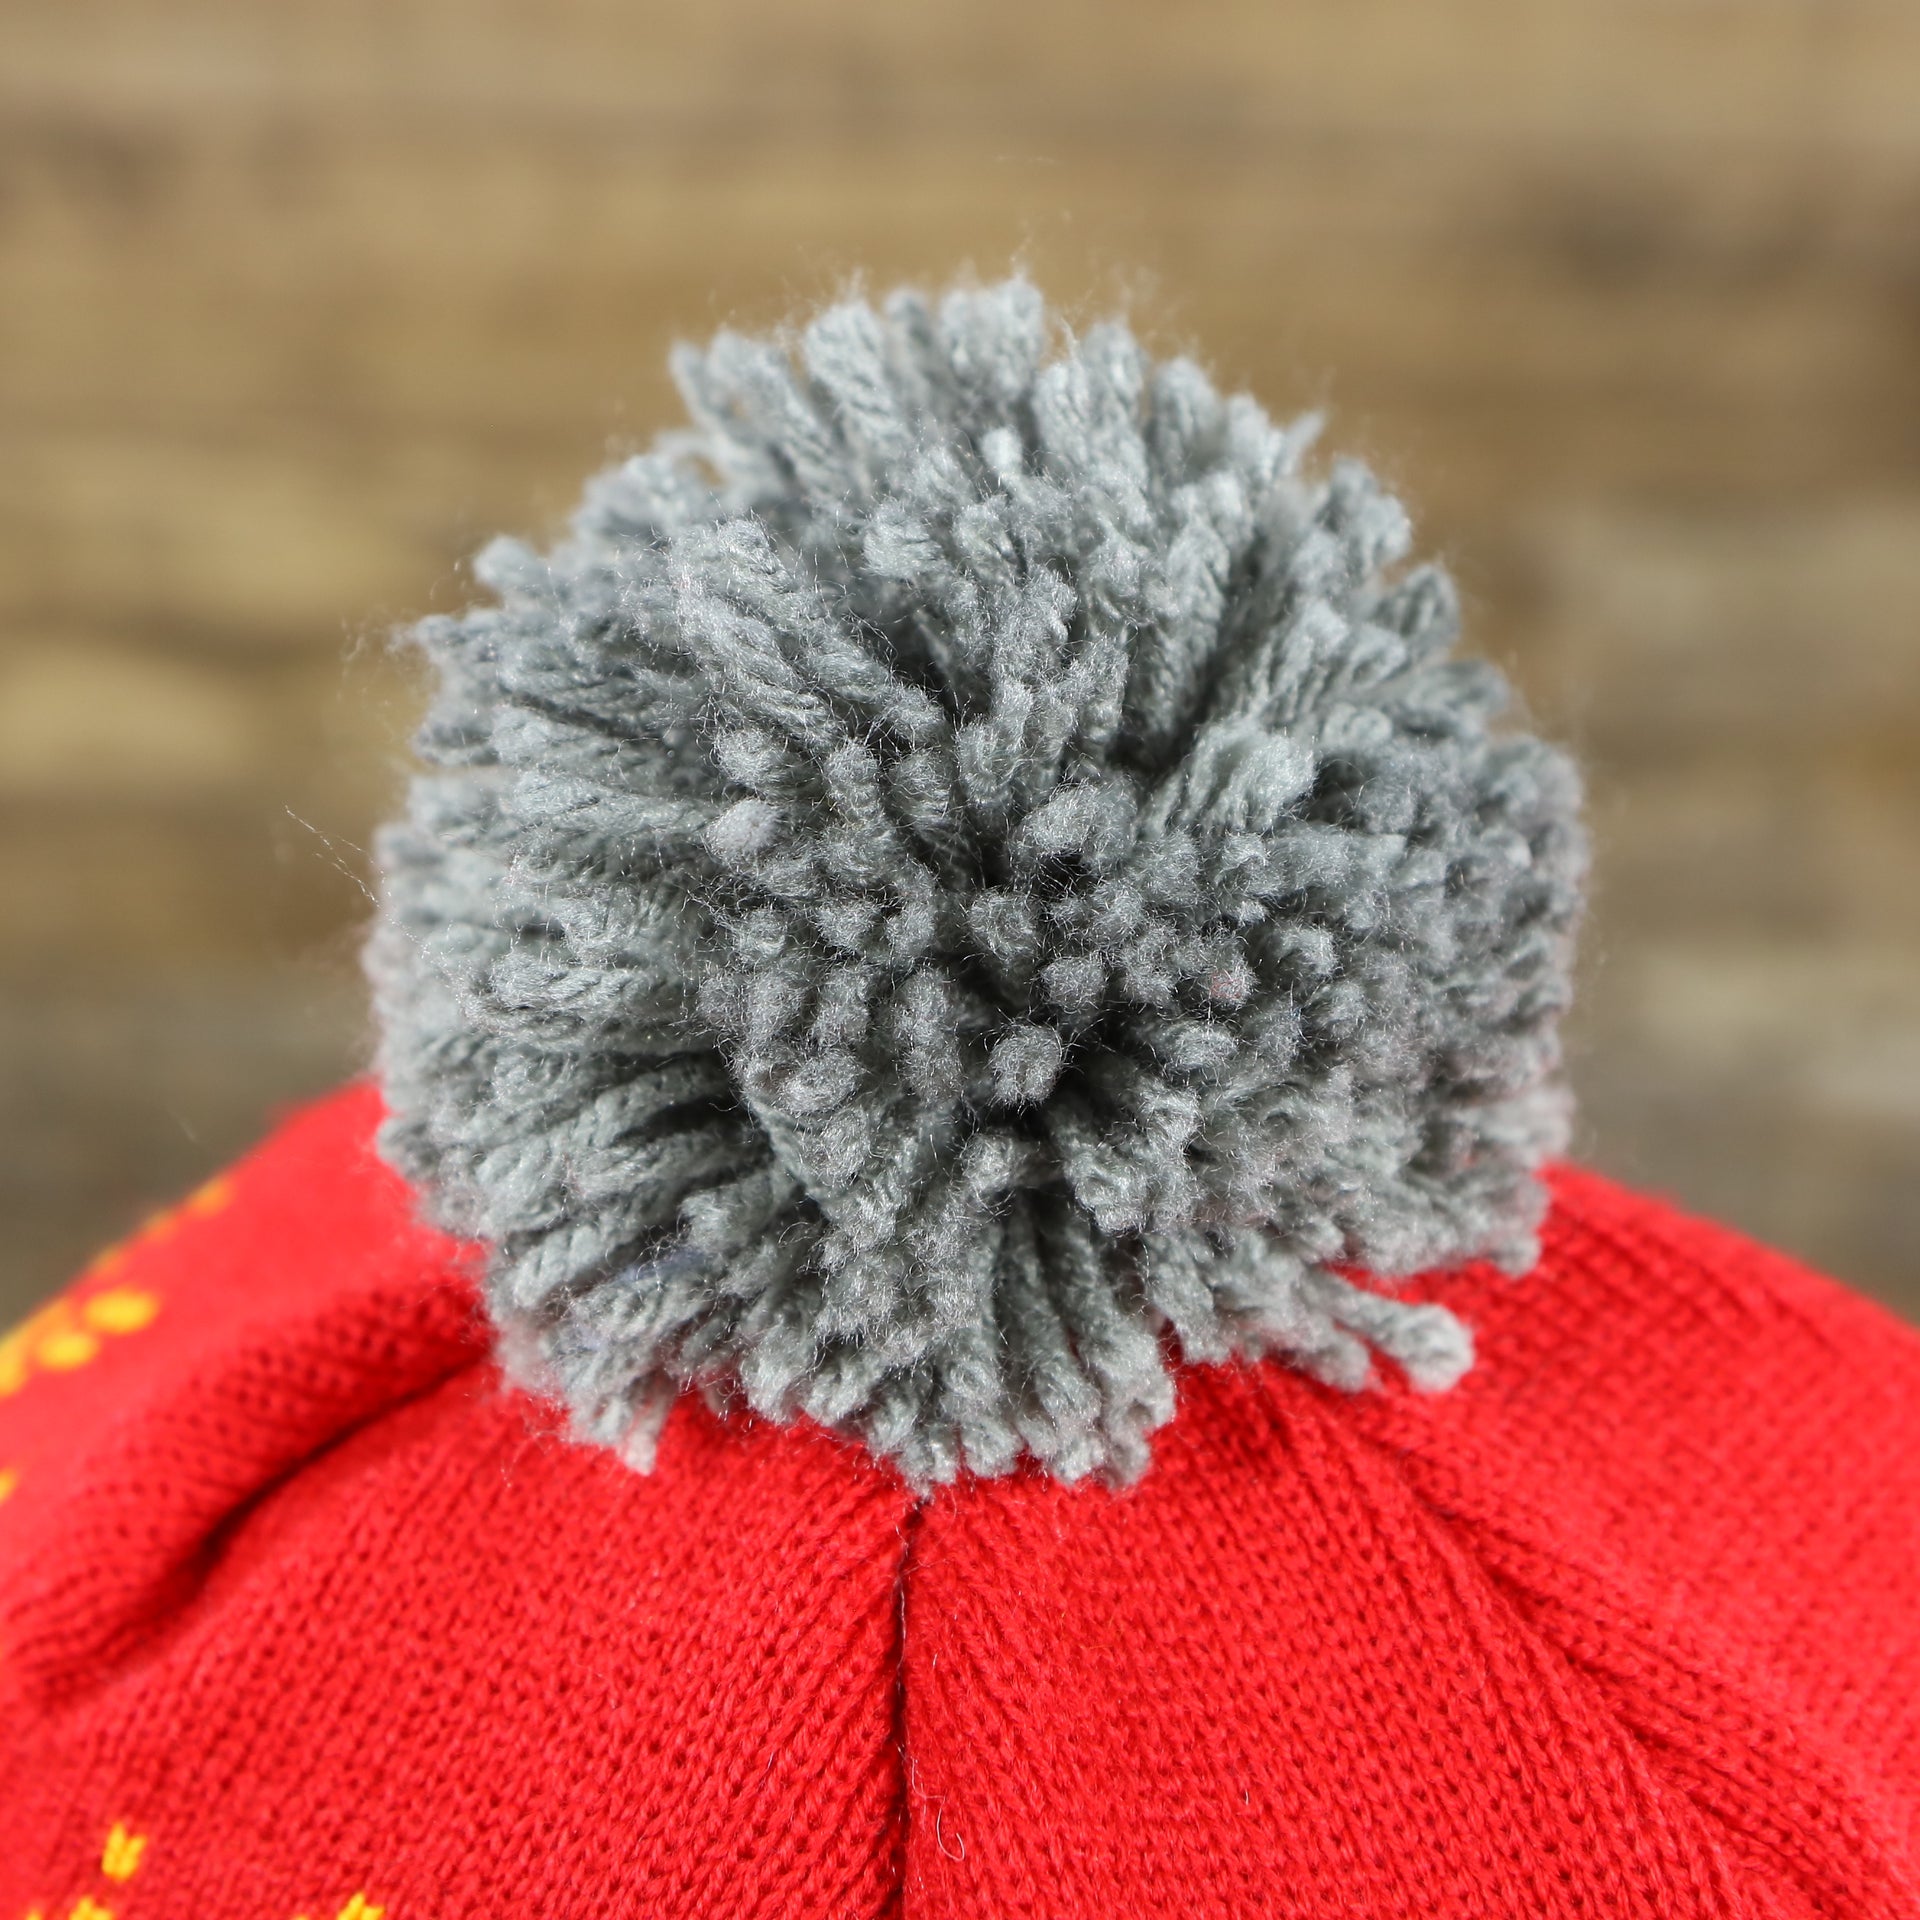 The Gray Pom Pom on the Retro Houston Rockets Arctic Snowflake Ugly Sweater Pattern Cuffed Beanie With Pom Pom | Yellow, Maroon, and Gray Winter Beanie